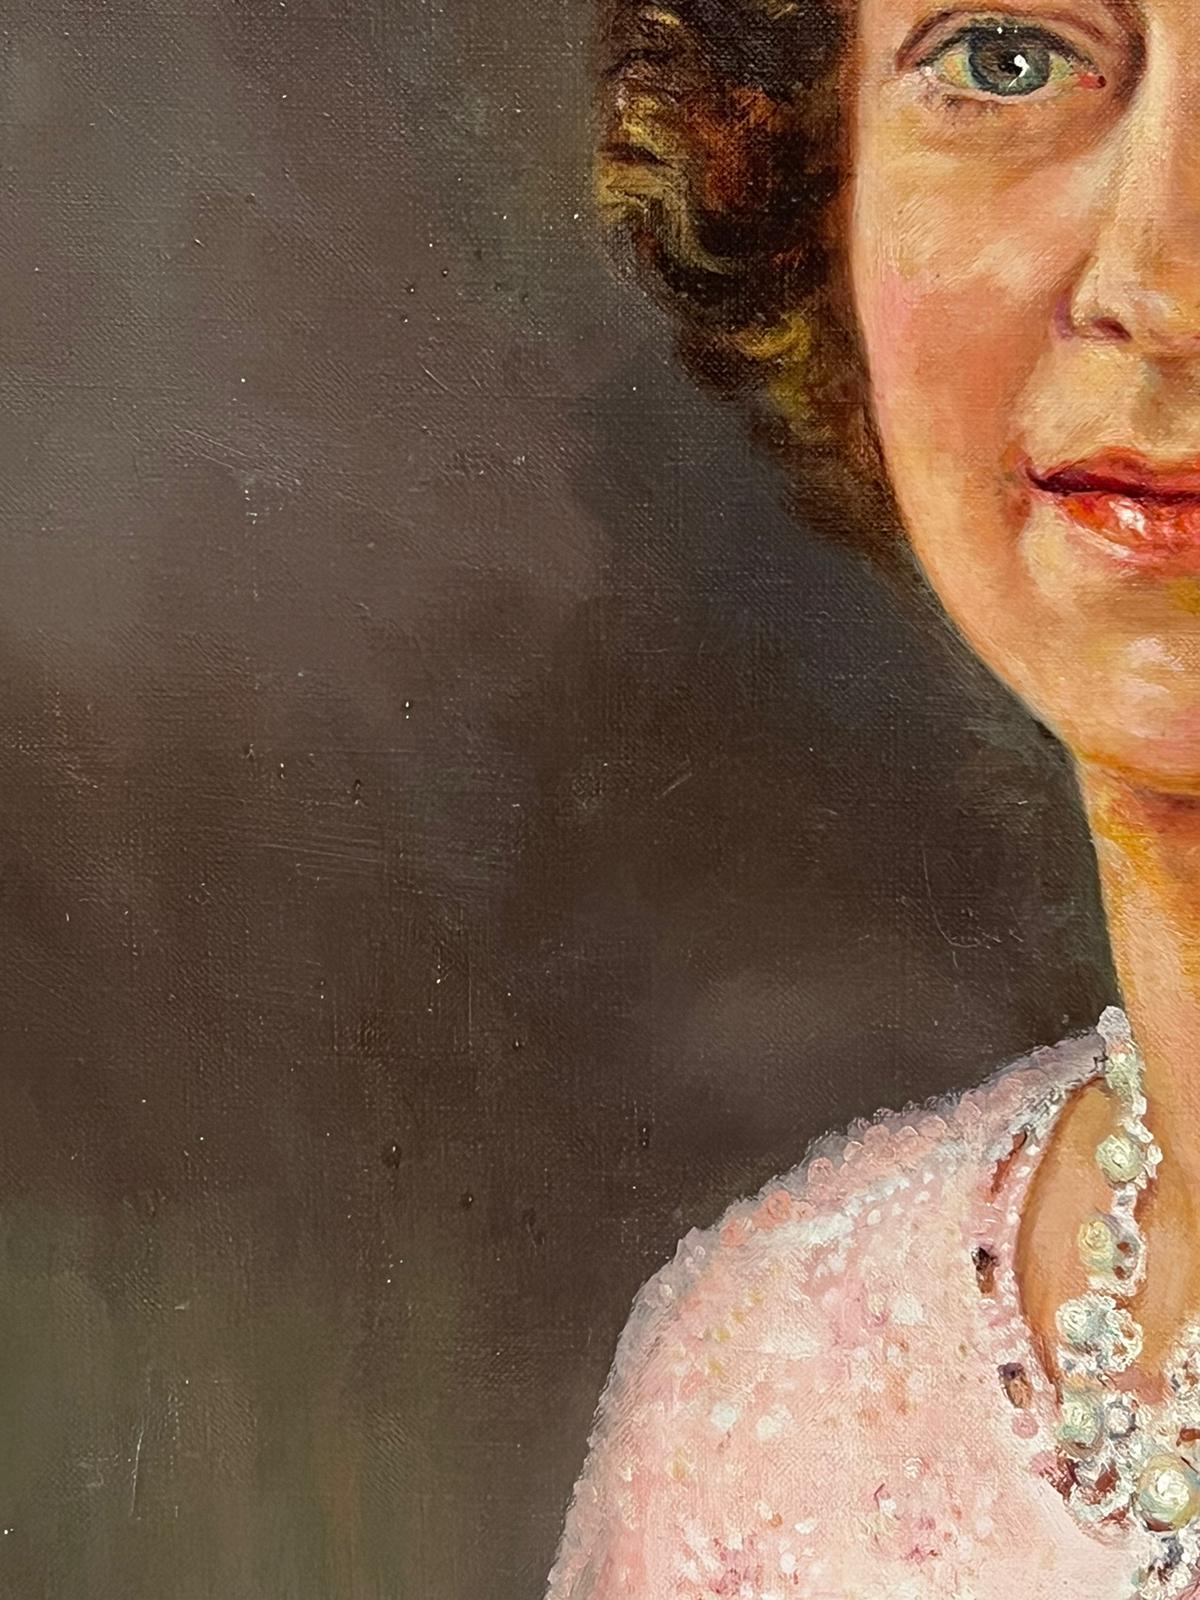 The Late HM Queen Elizabeth II
Edne G. Simpson, British 20th century
signed oil on canvas, unframed
painting: 24 x 20 inches
provenance: private collection, UK
condition: good and sound condition